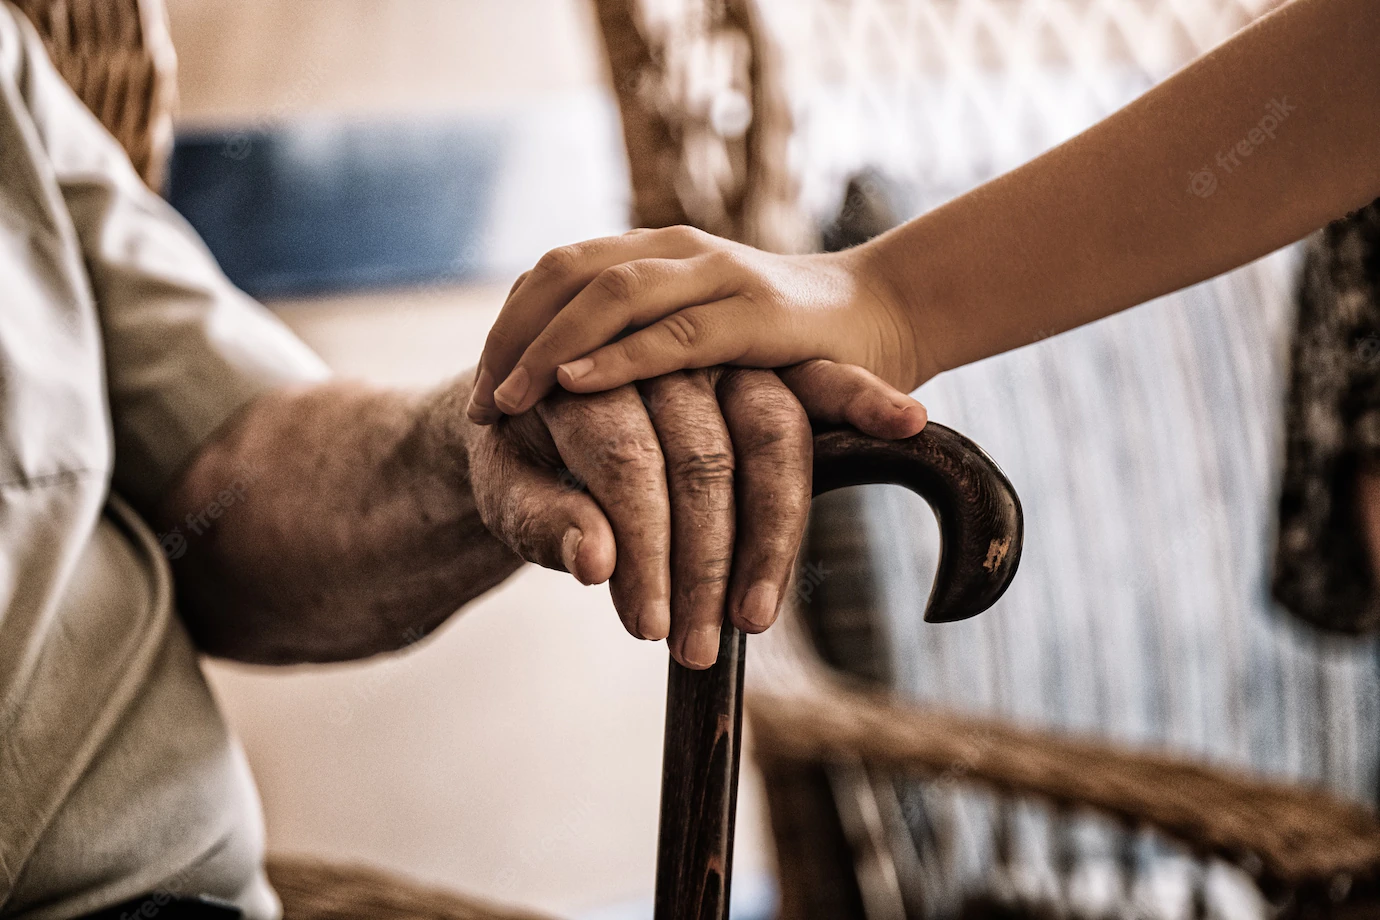 child-s-hand-old-man-s-hand-holding-cane_86638-236